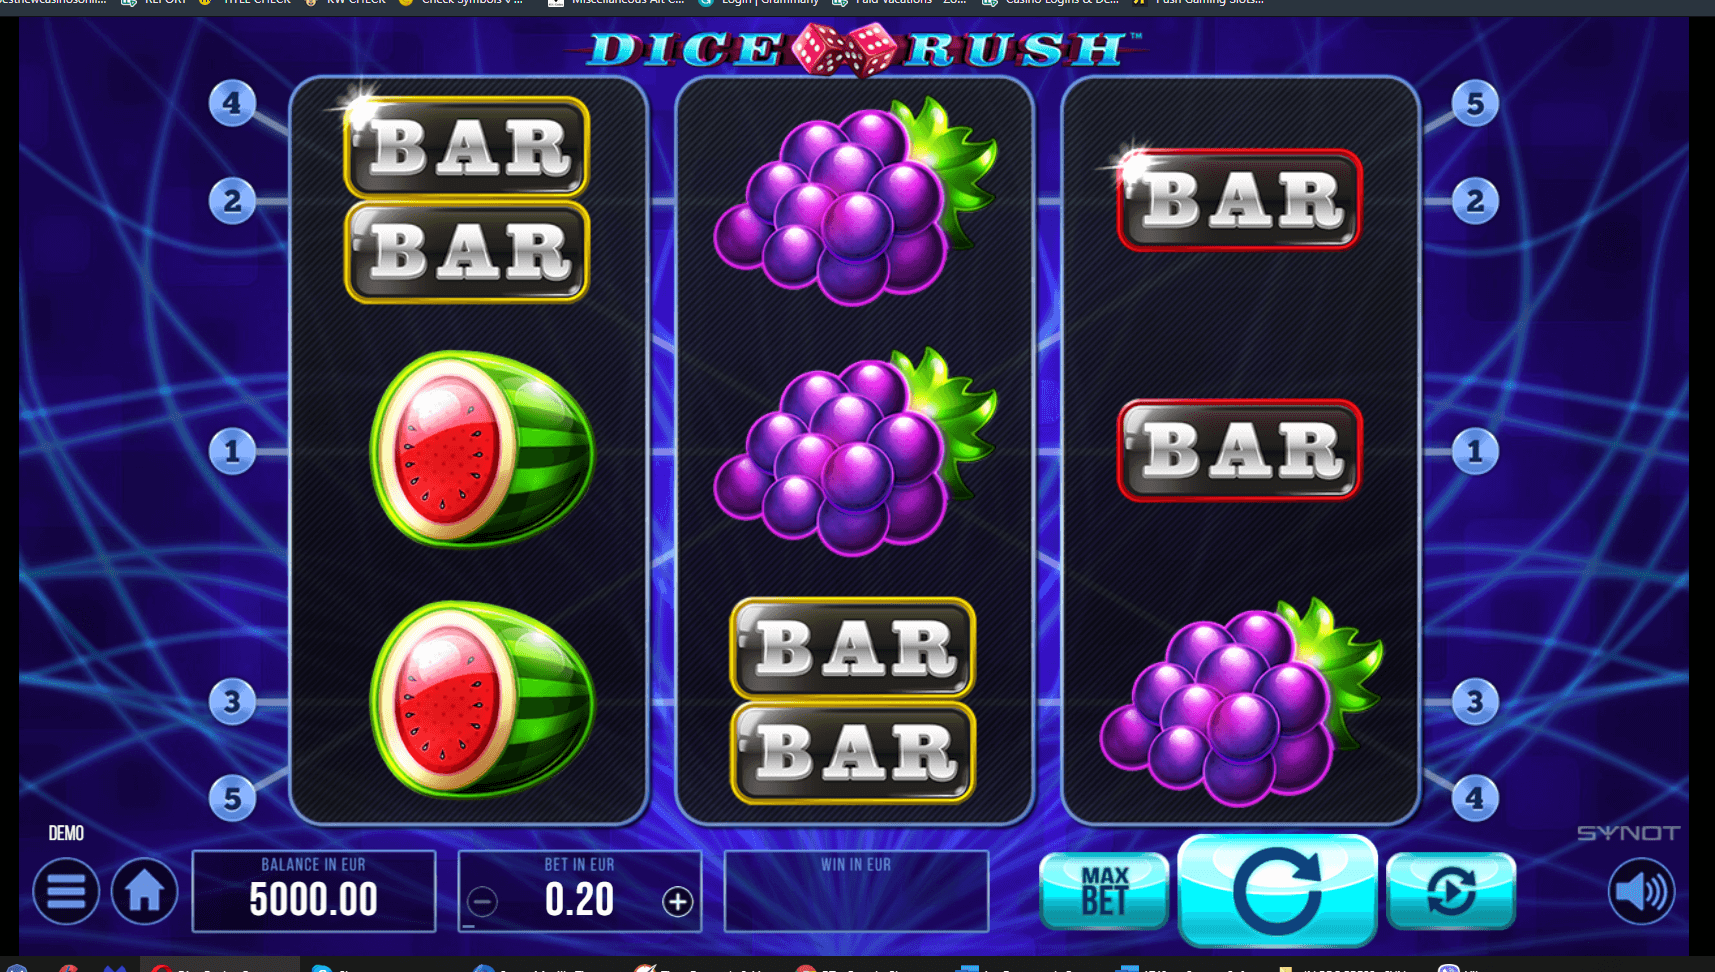 “Dice Rush” by SYNOT Games is a 3x3 classic-looking slot with 5 paylines